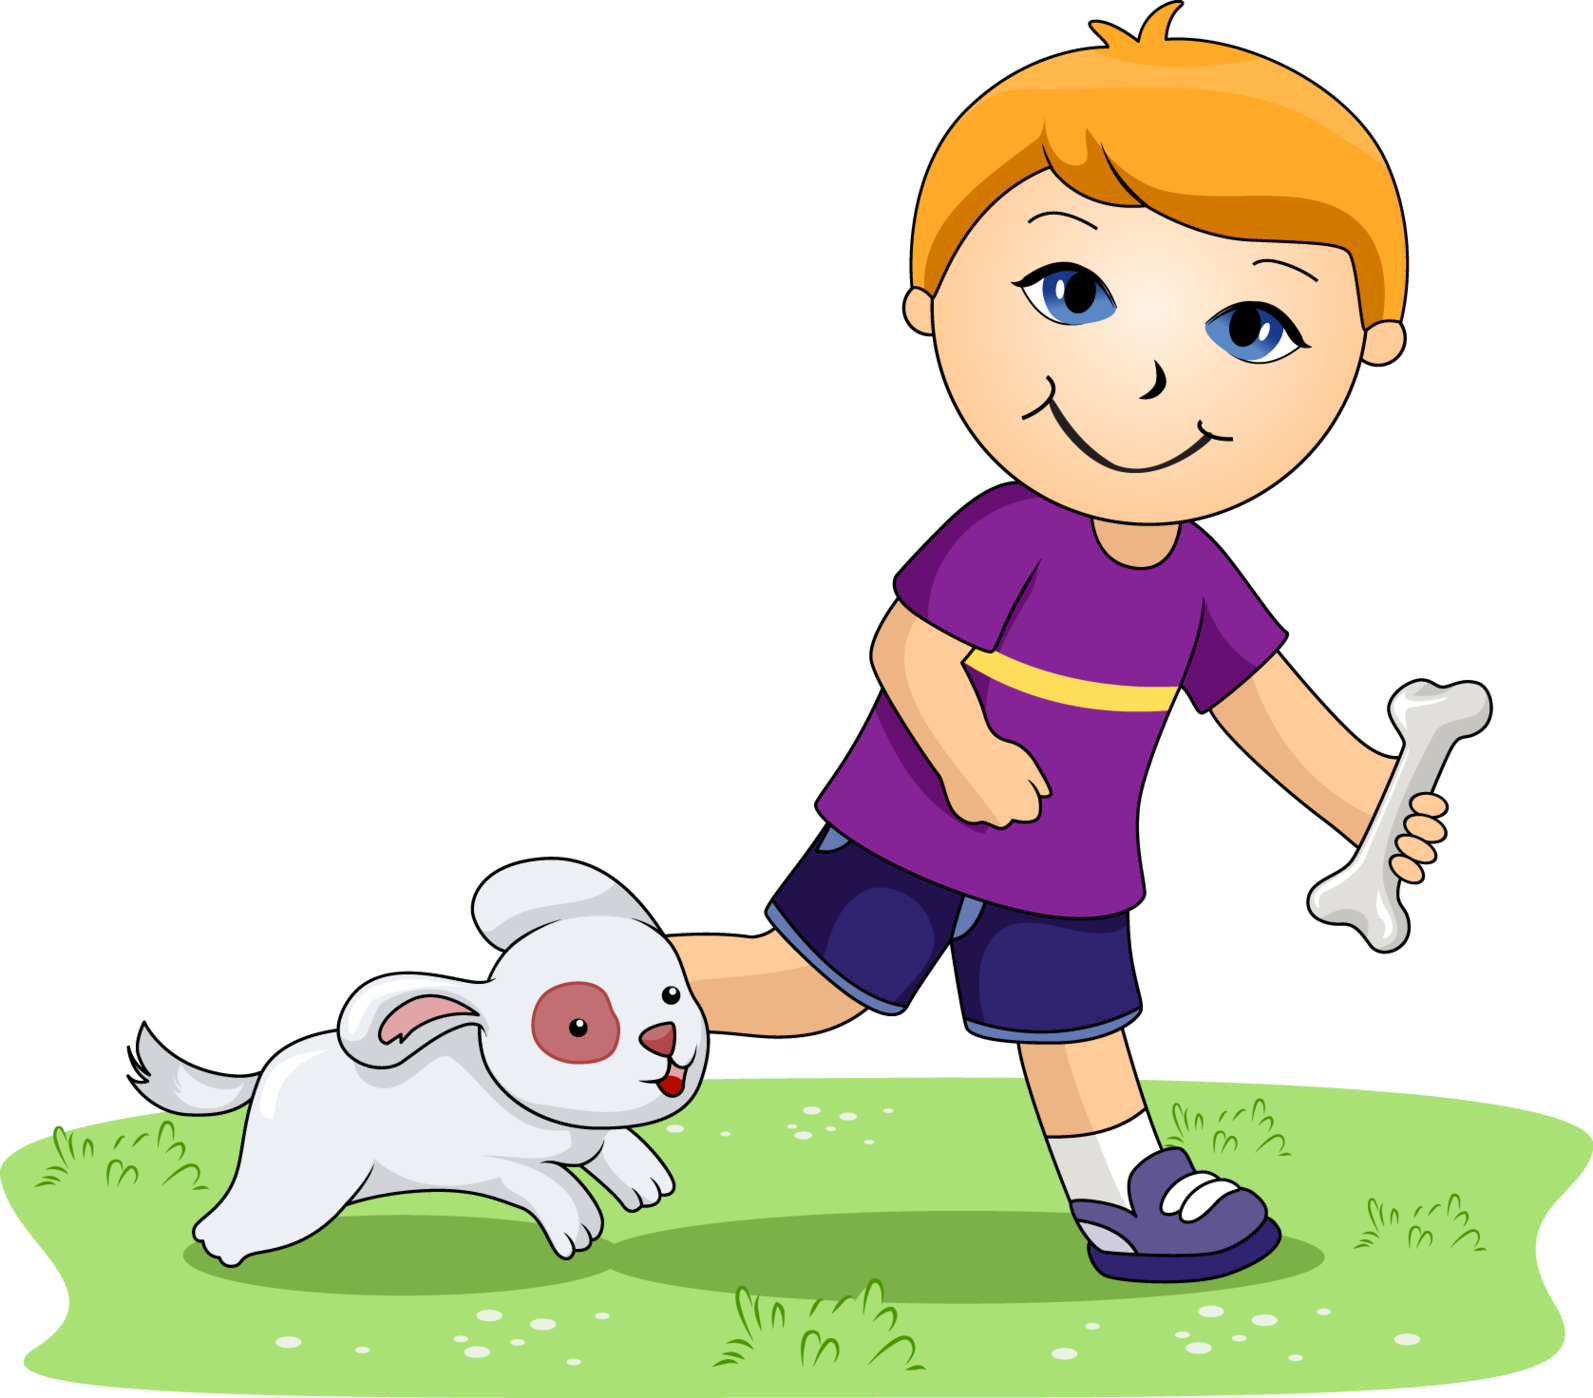 Dog kid graphics illustrations. Conflict clipart grudge